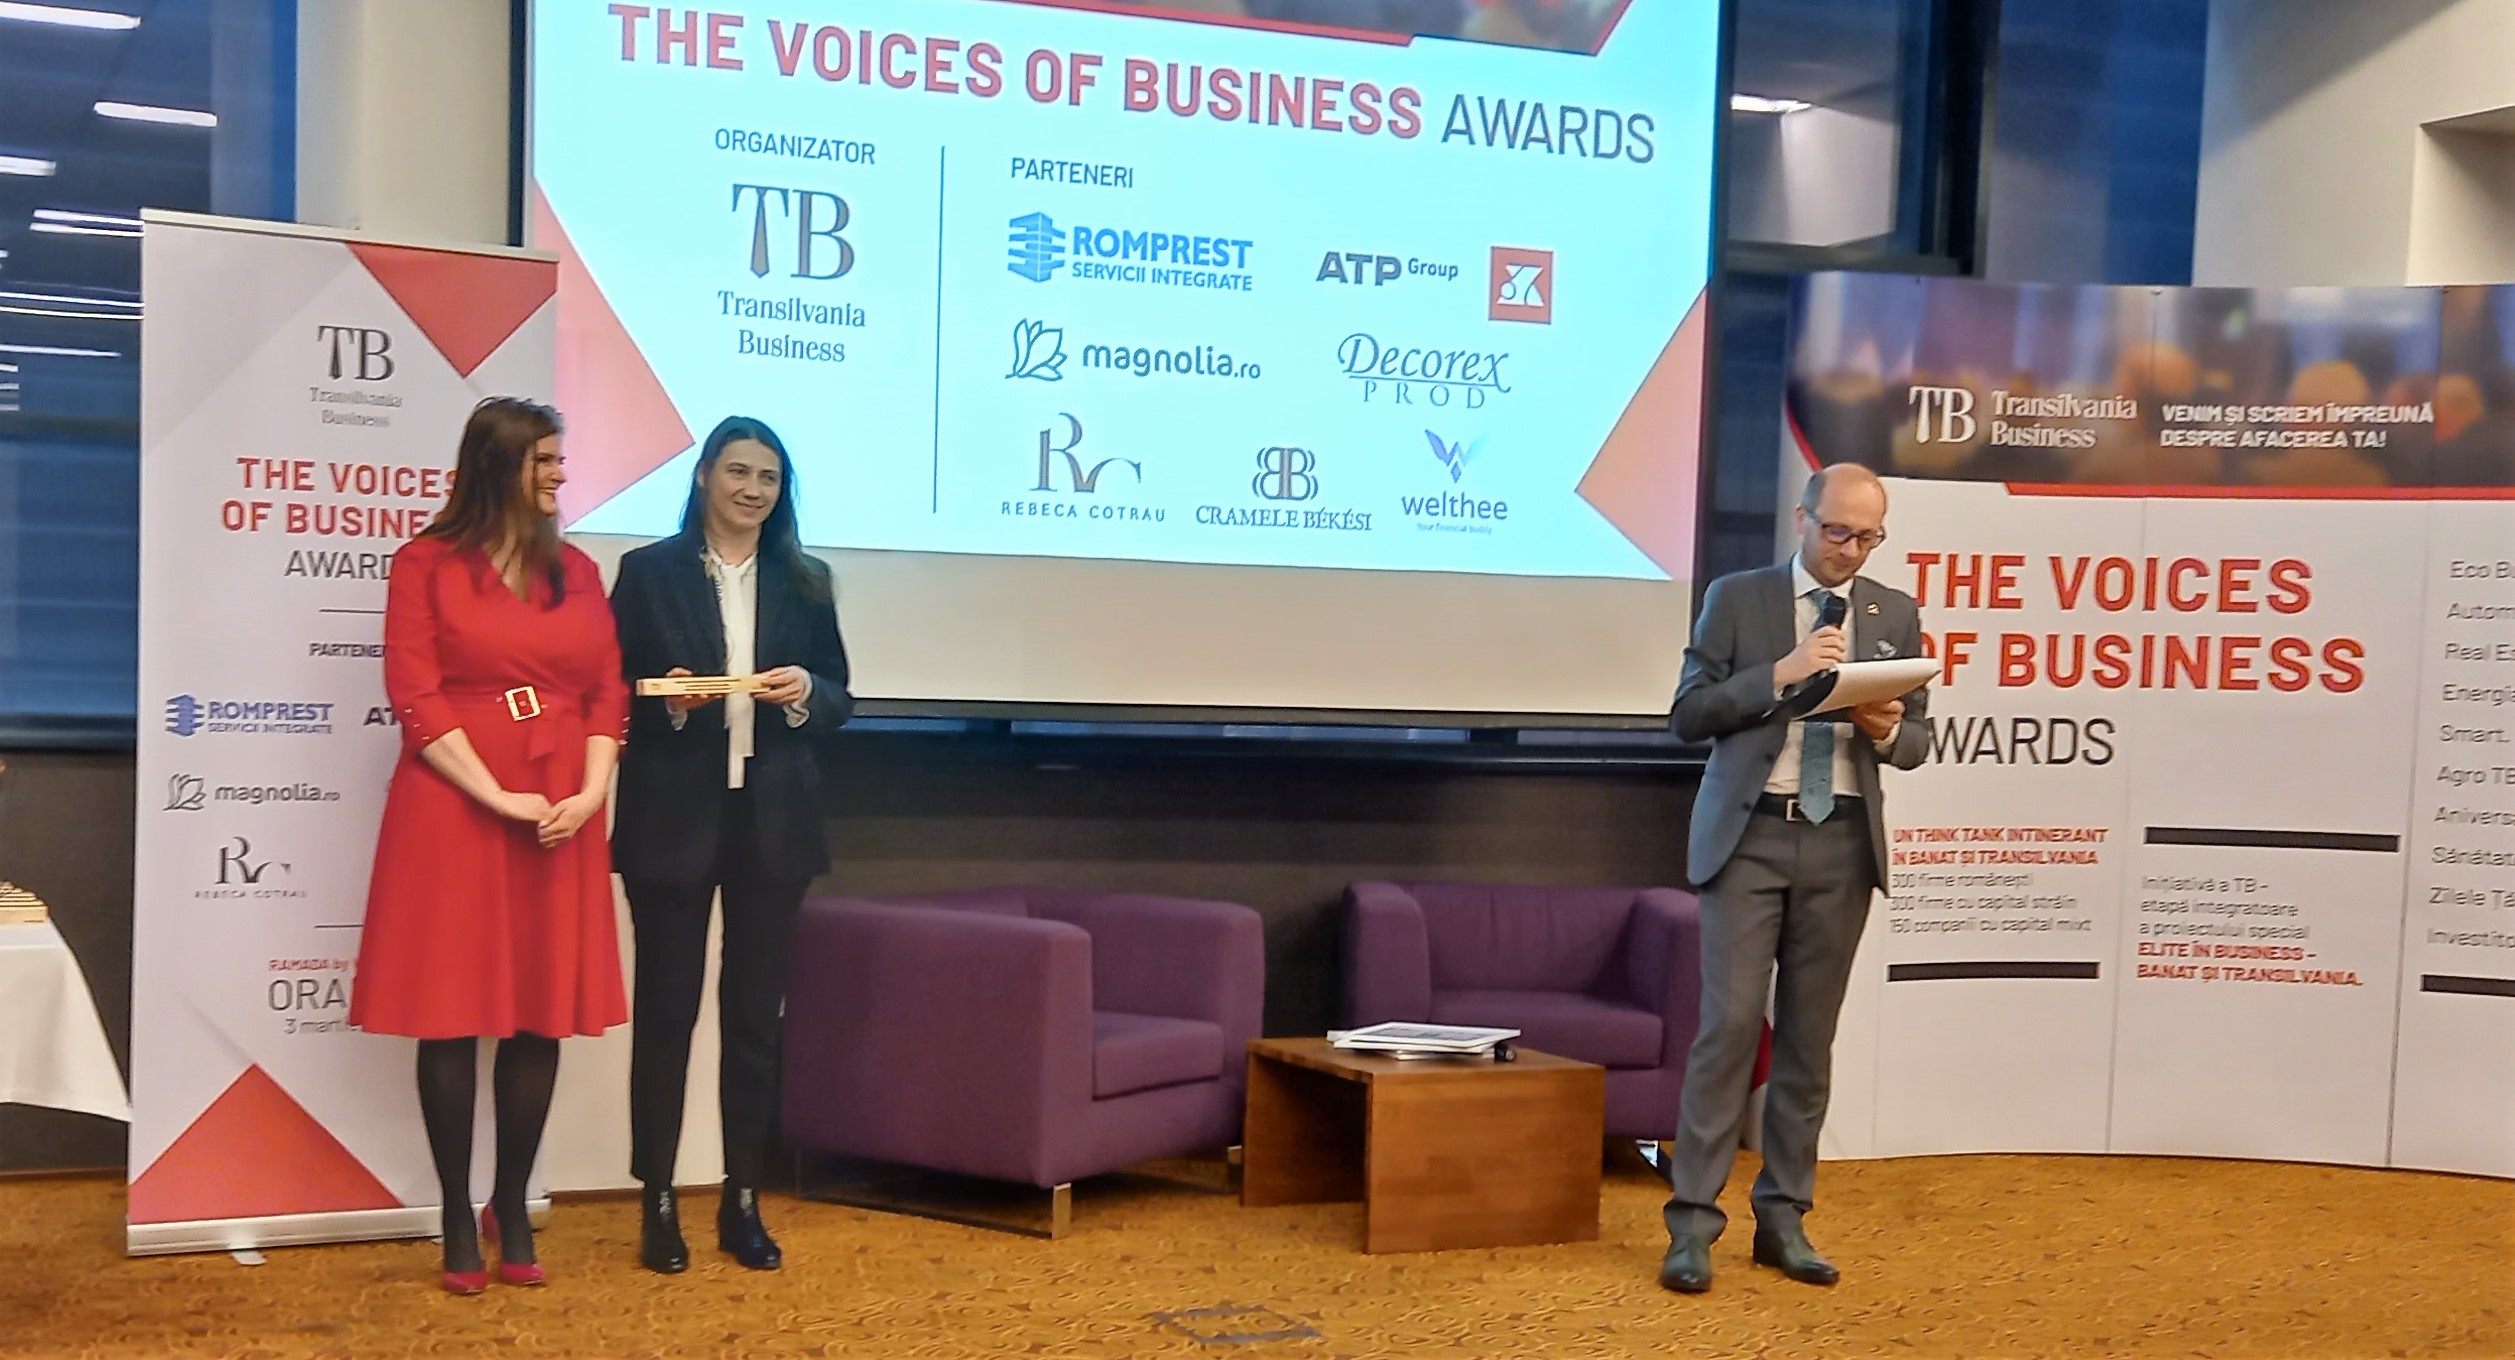 FOTO: The Voices of Business Awards 06.03.2022